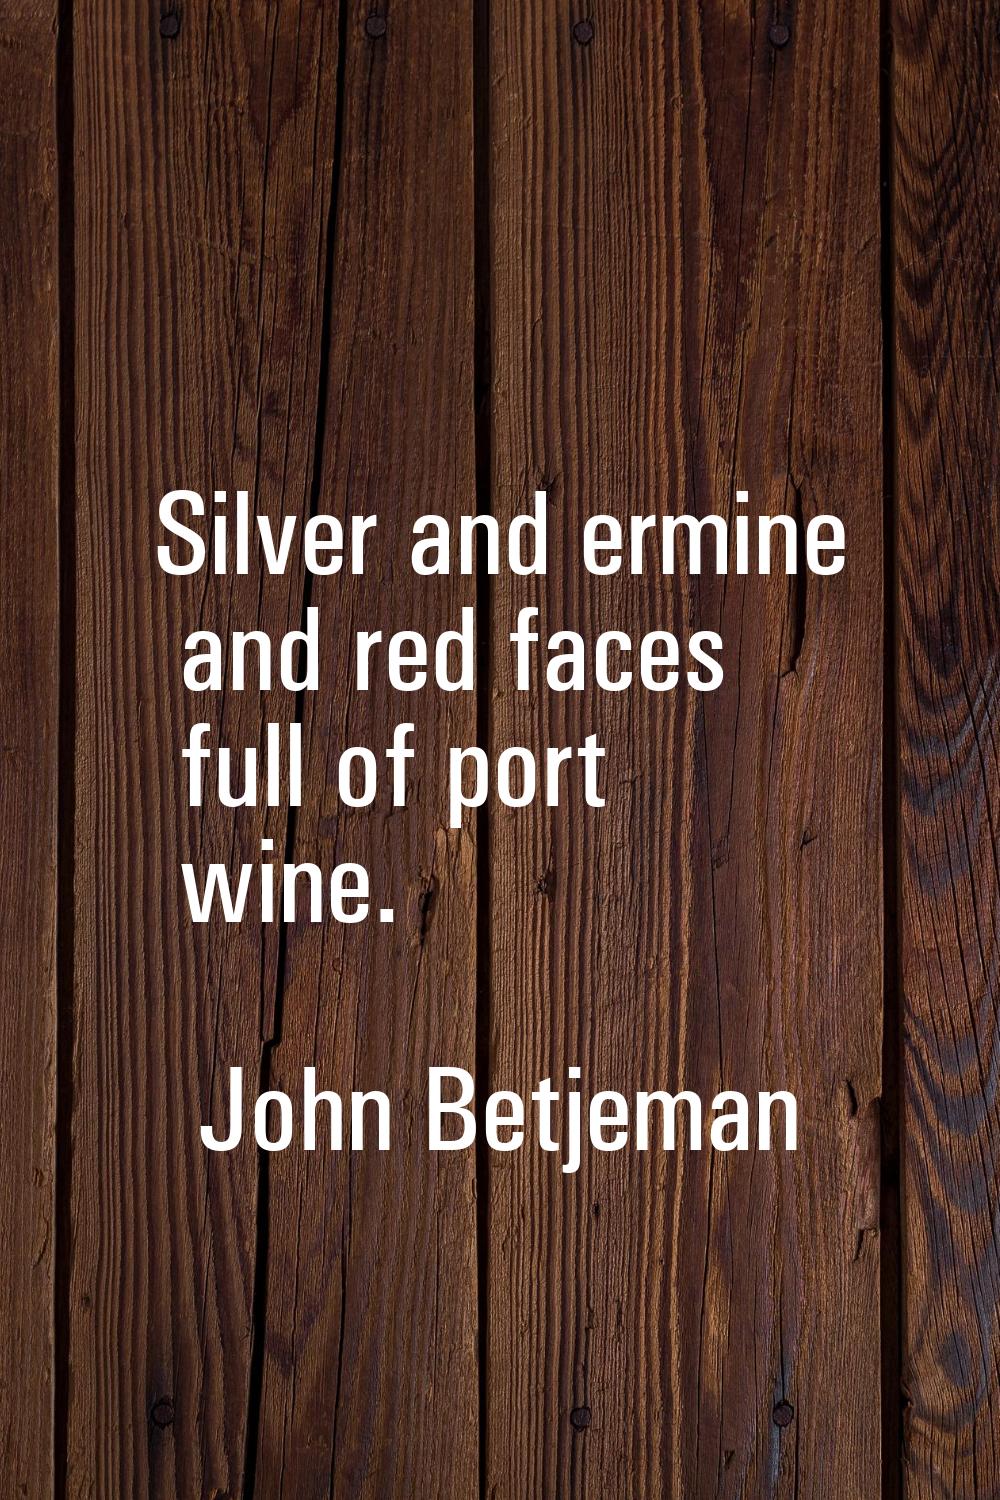 Silver and ermine and red faces full of port wine.